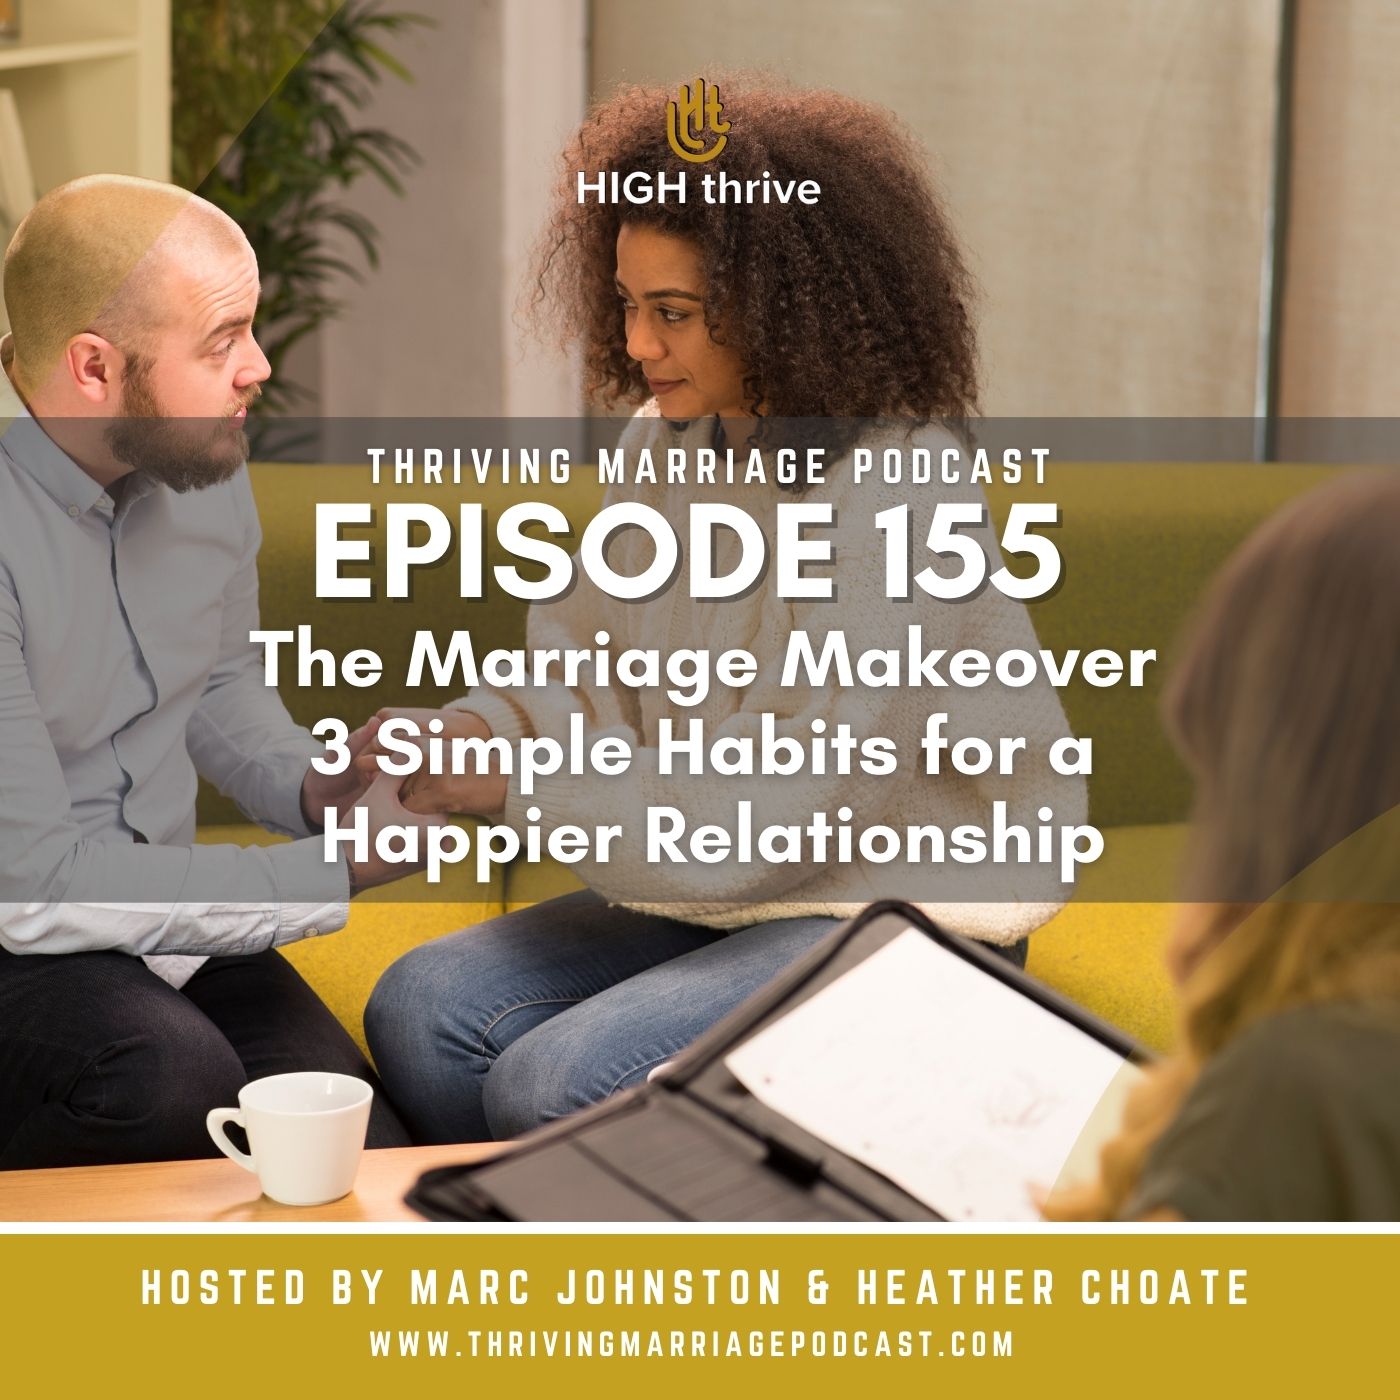 Episode 155: The Marriage Makeover: 3 Simple Habits for a Happier Relationship